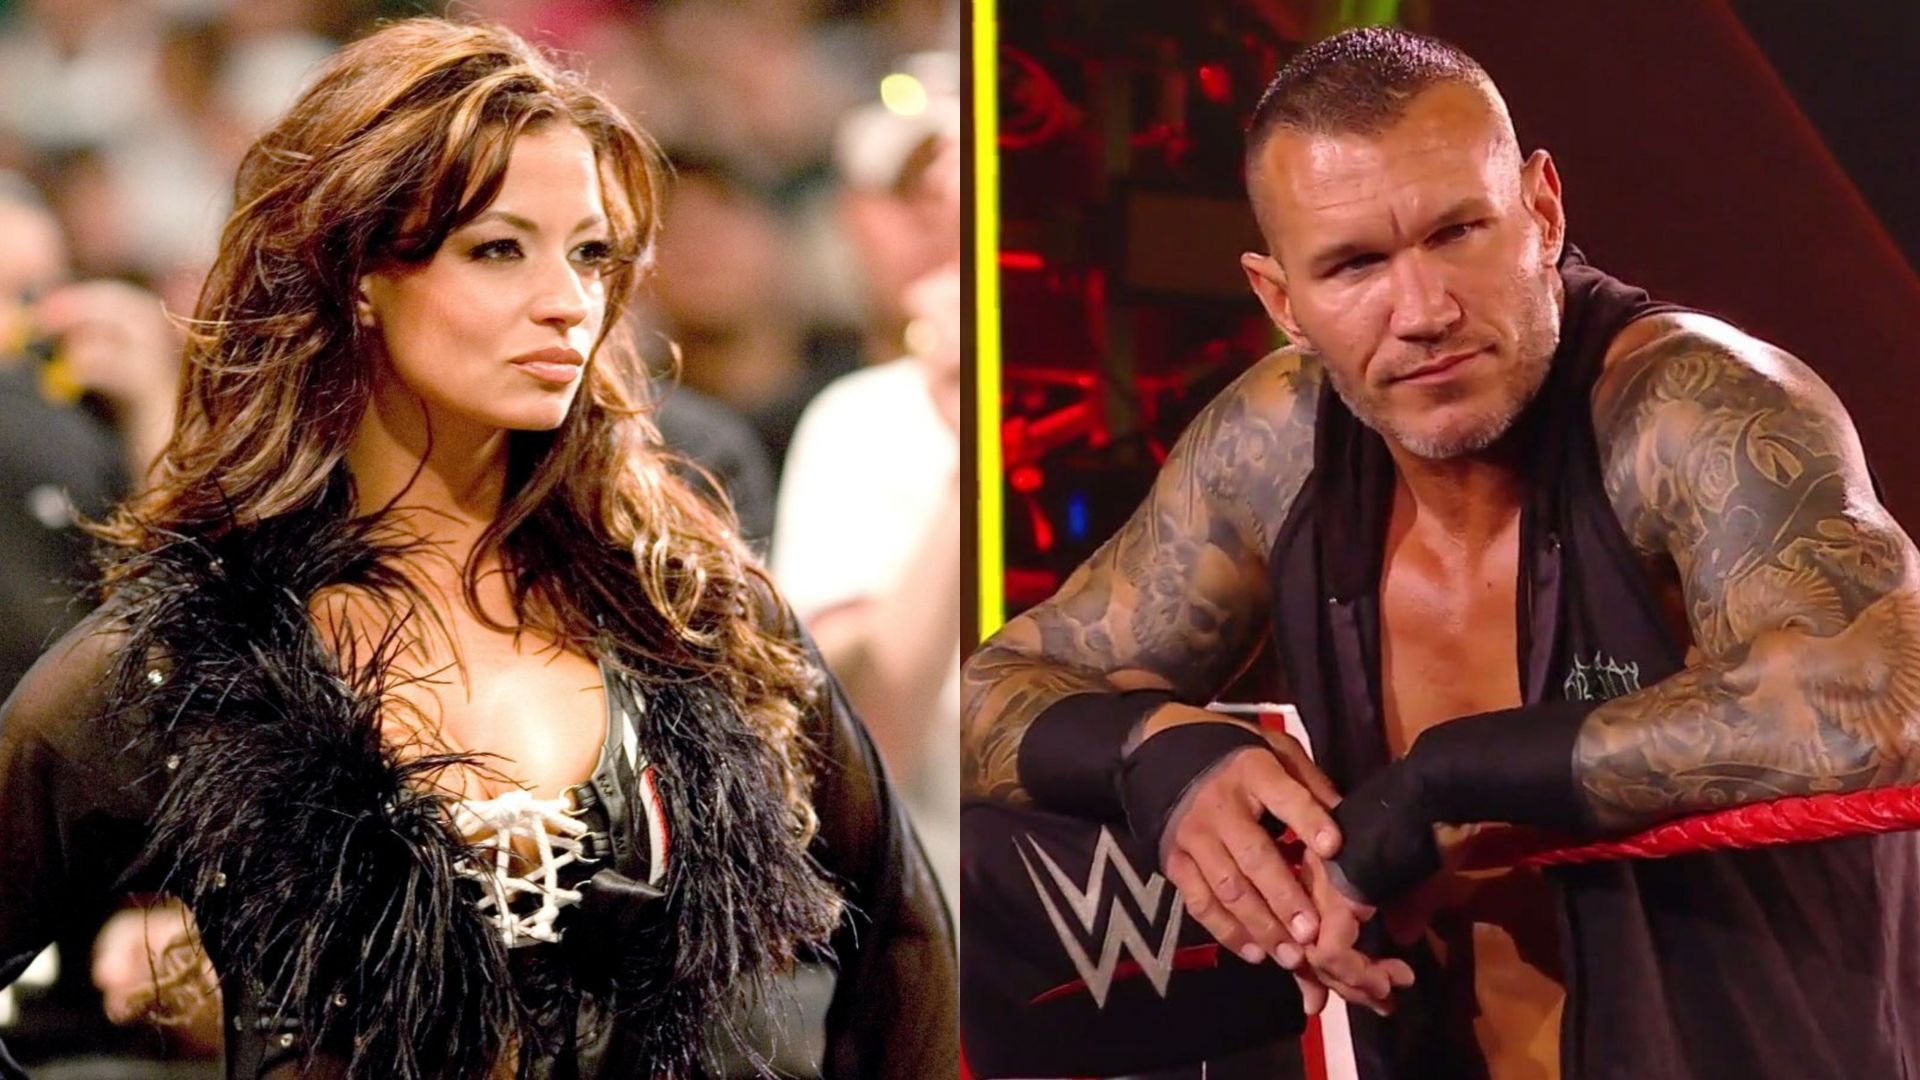 Some fans thought that Candice Michelle once dated Randy Orton